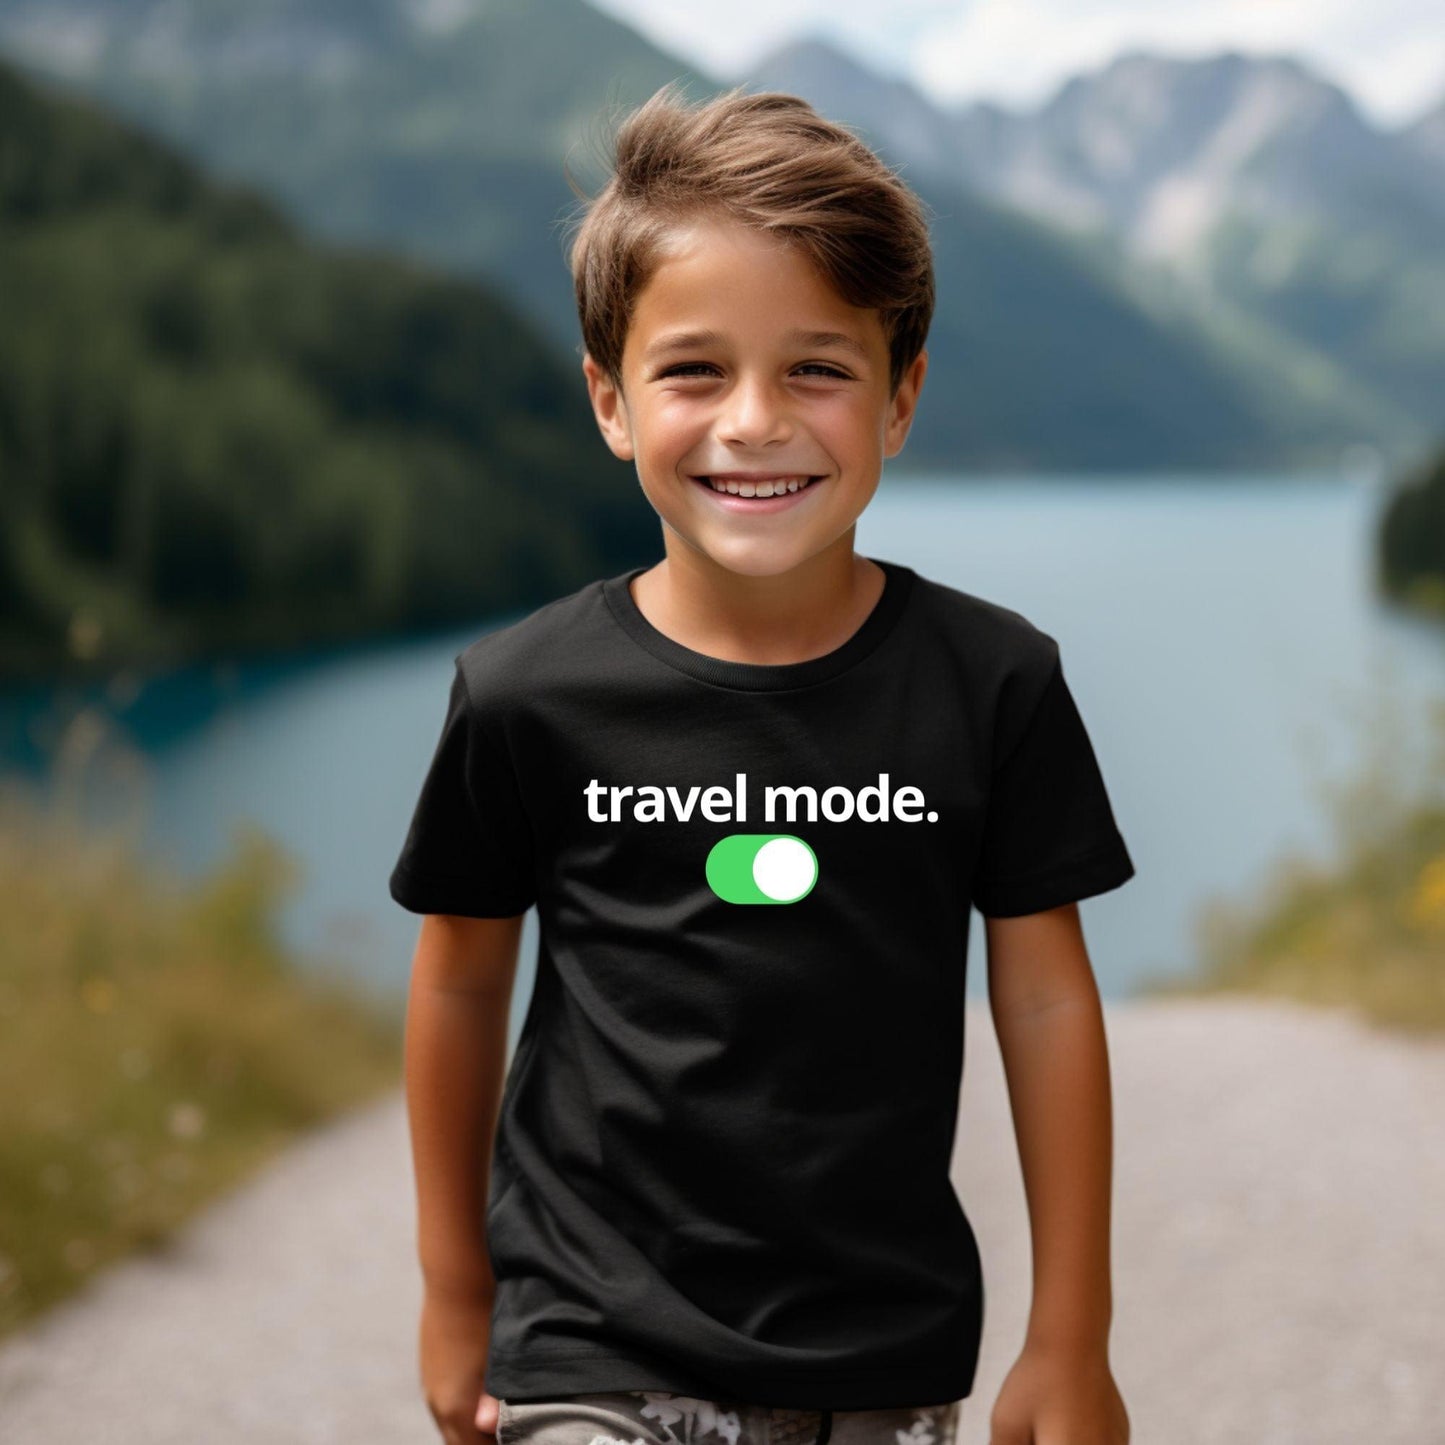 Travel Mode is On Kids T-Shirt - Adventure Threads Company